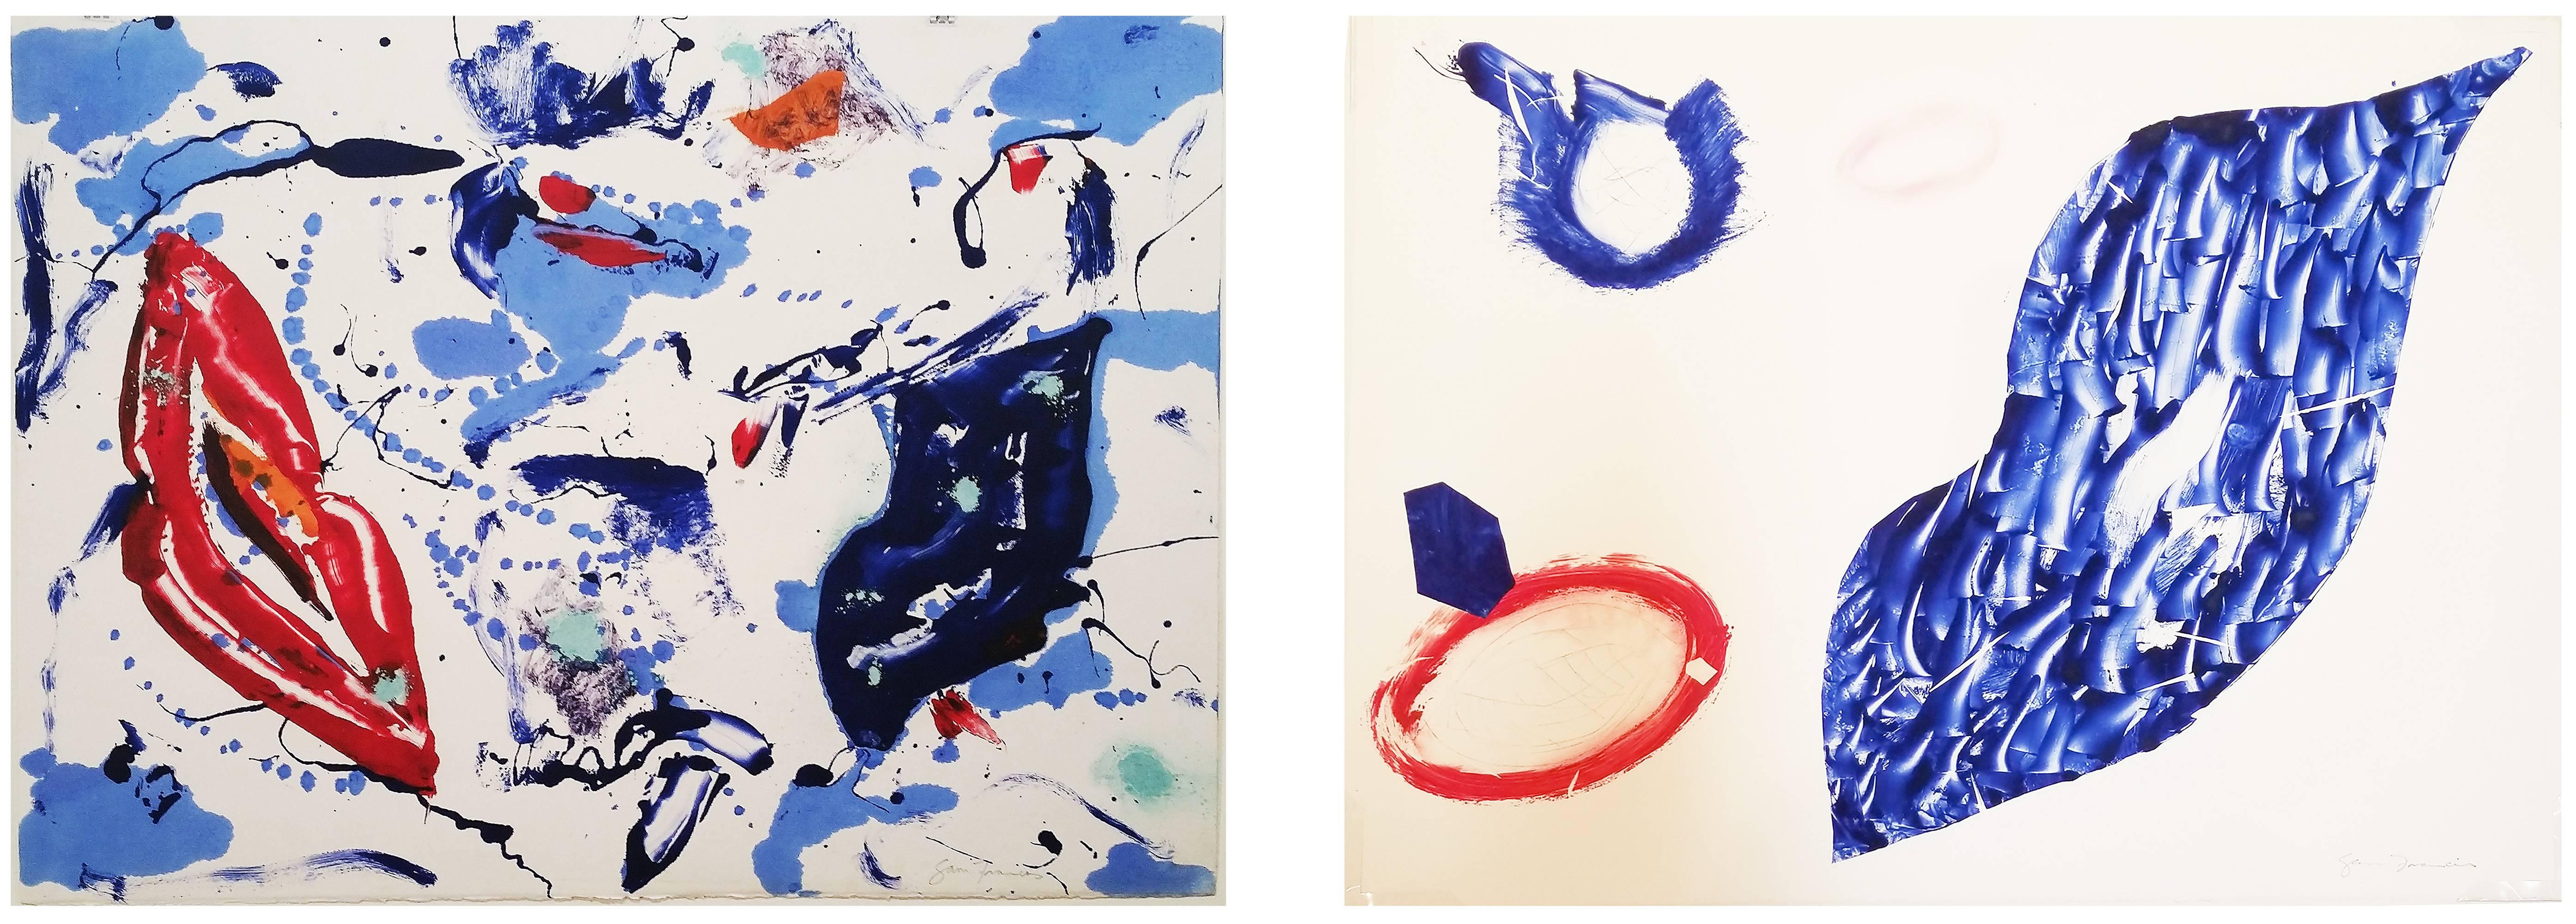 Untitled 1 & 2 monotypes (from the Baby Lips Series) - Mixed Media Art by Sam Francis